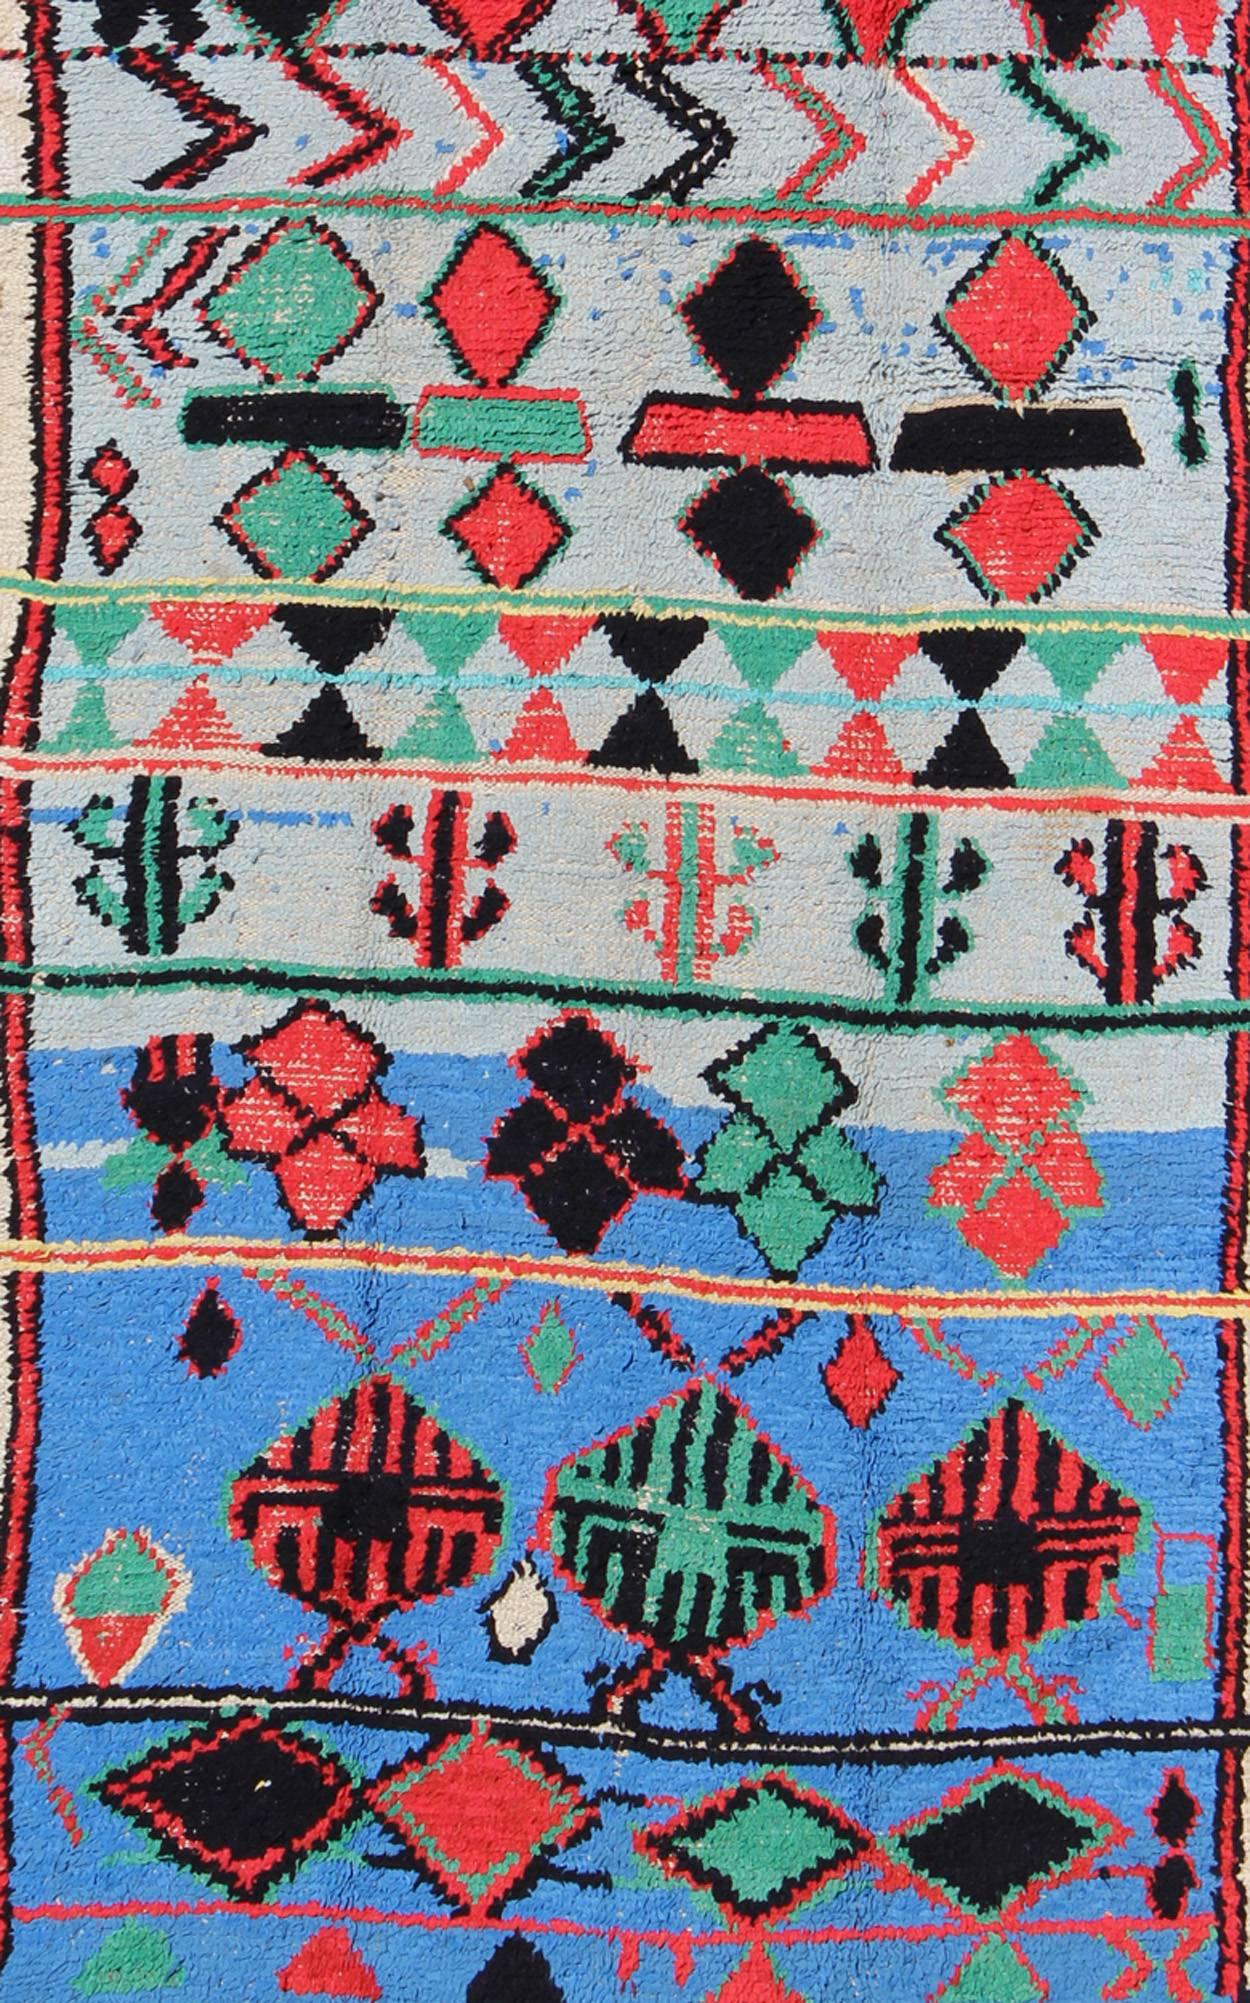 Hand-Knotted Vivid and Vibrant Vintage Moroccan Rug with Scattered Tribal Motifs